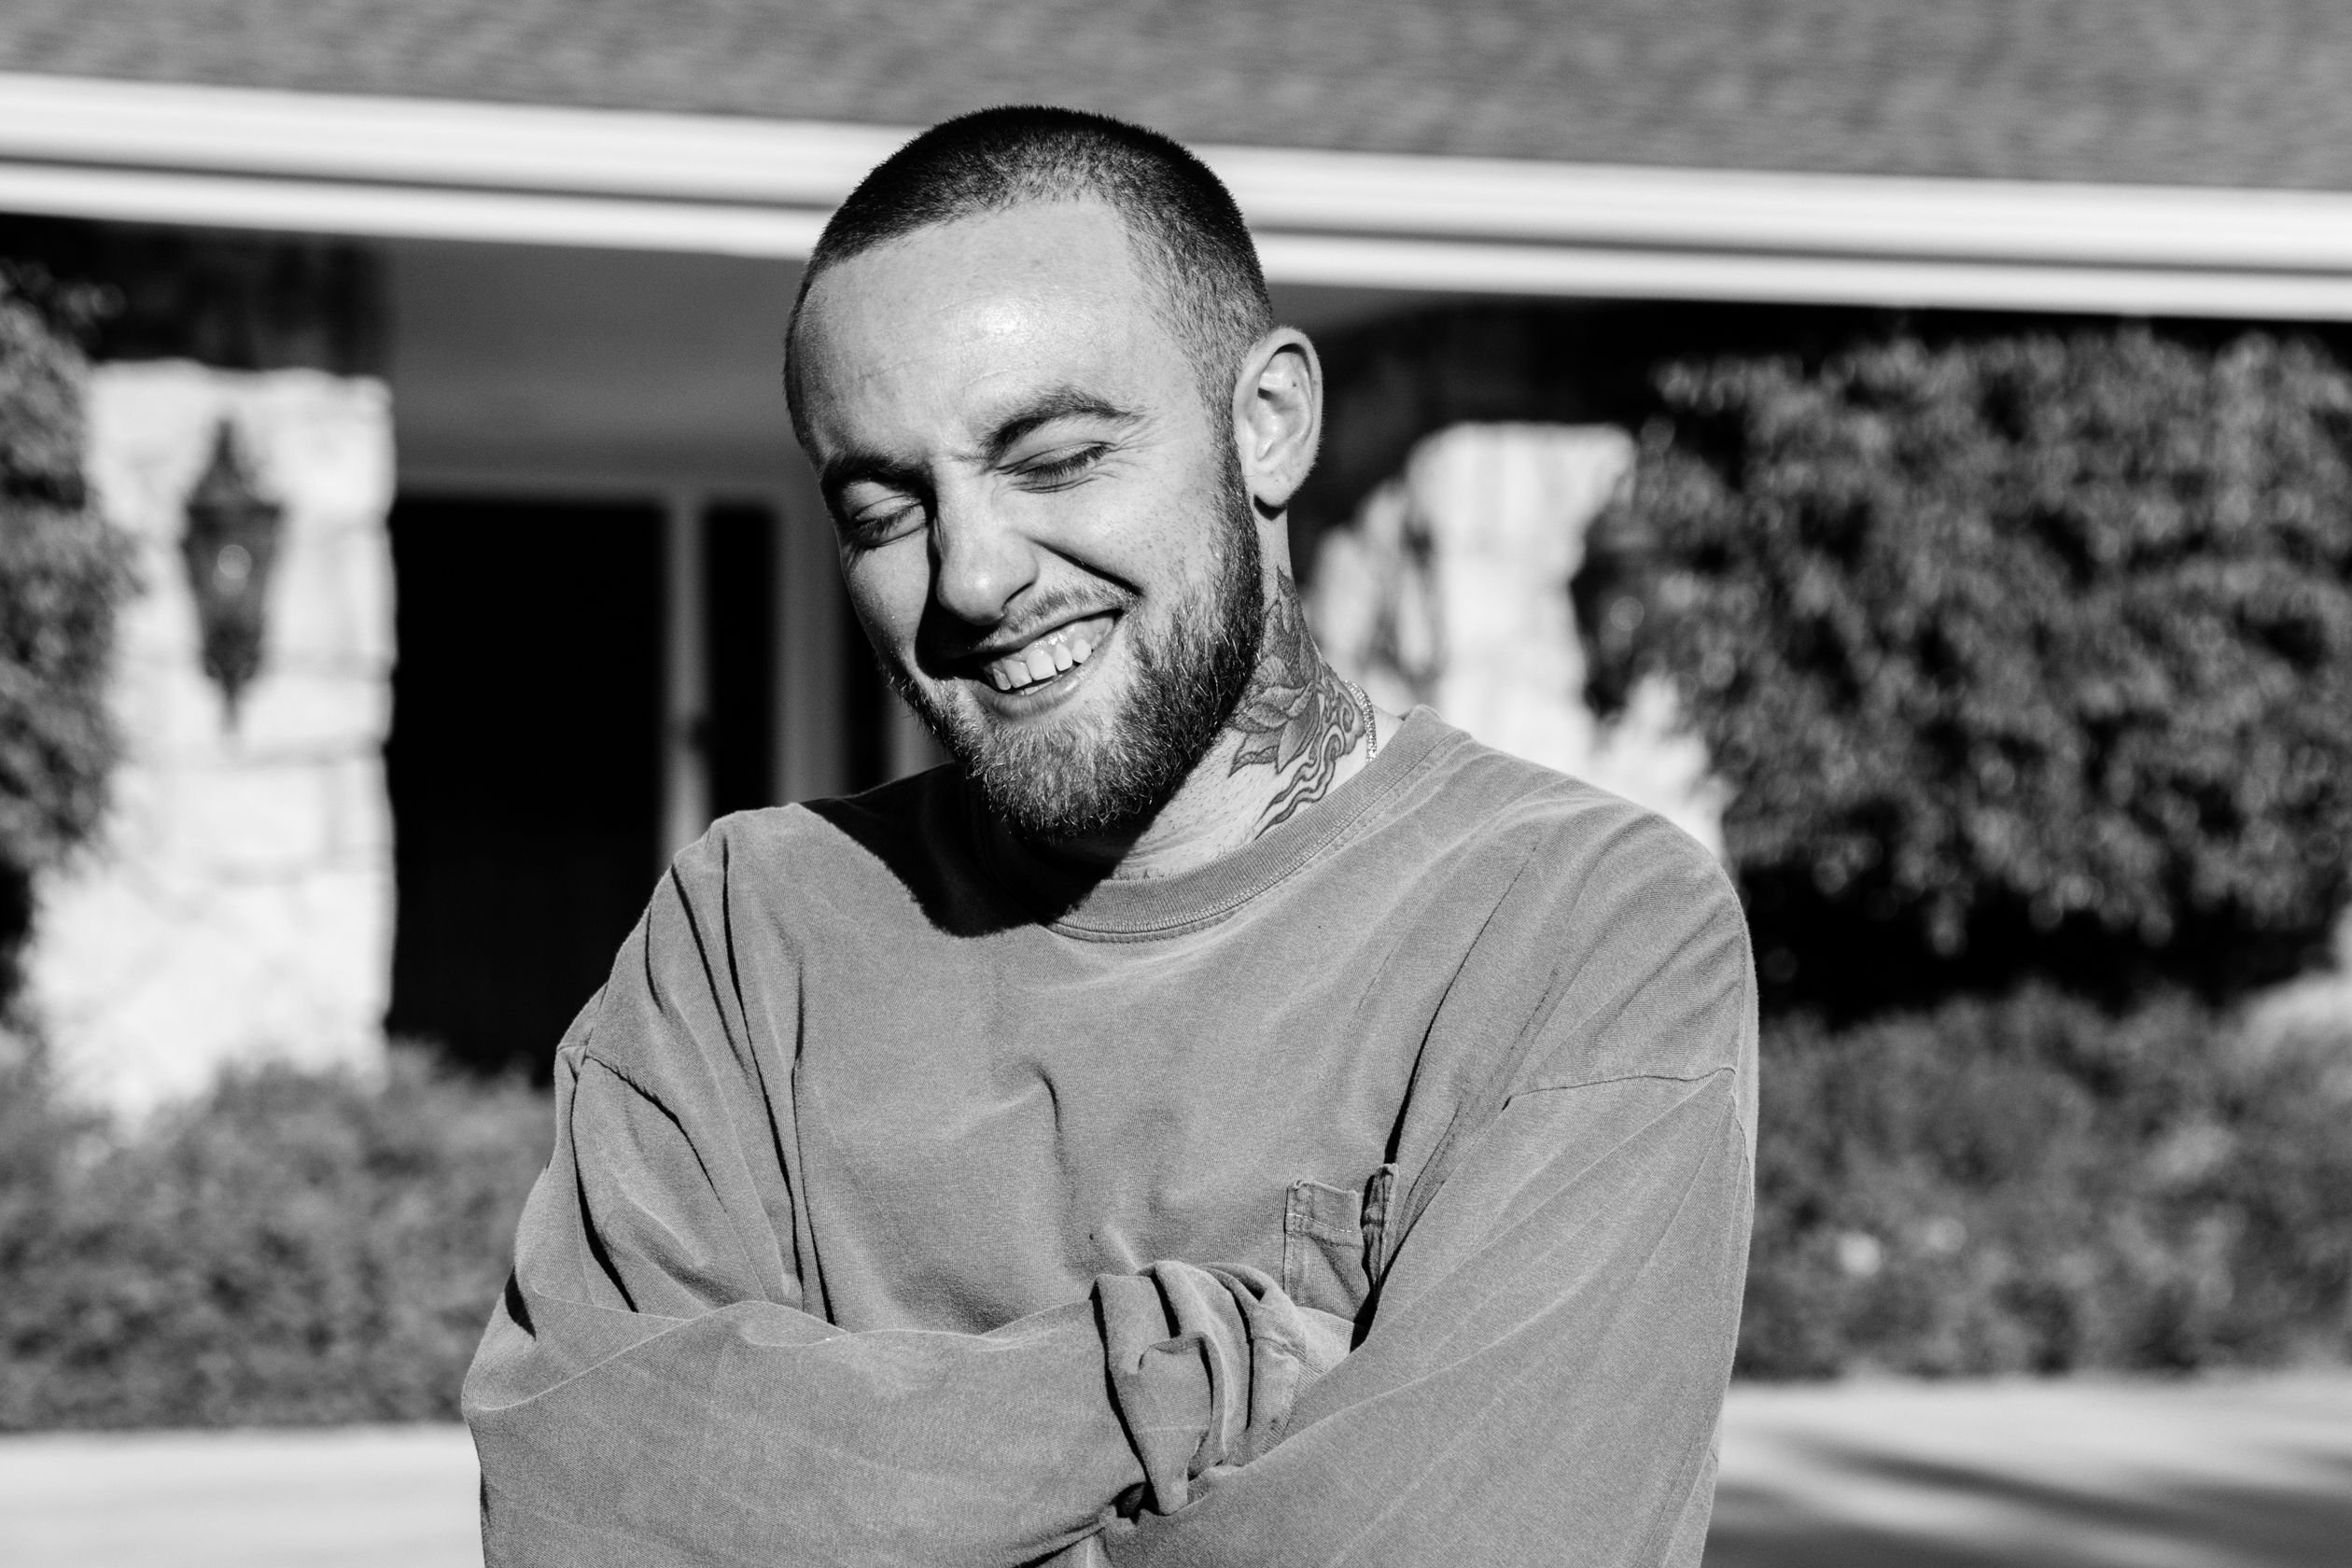 Who was Mac Miller?